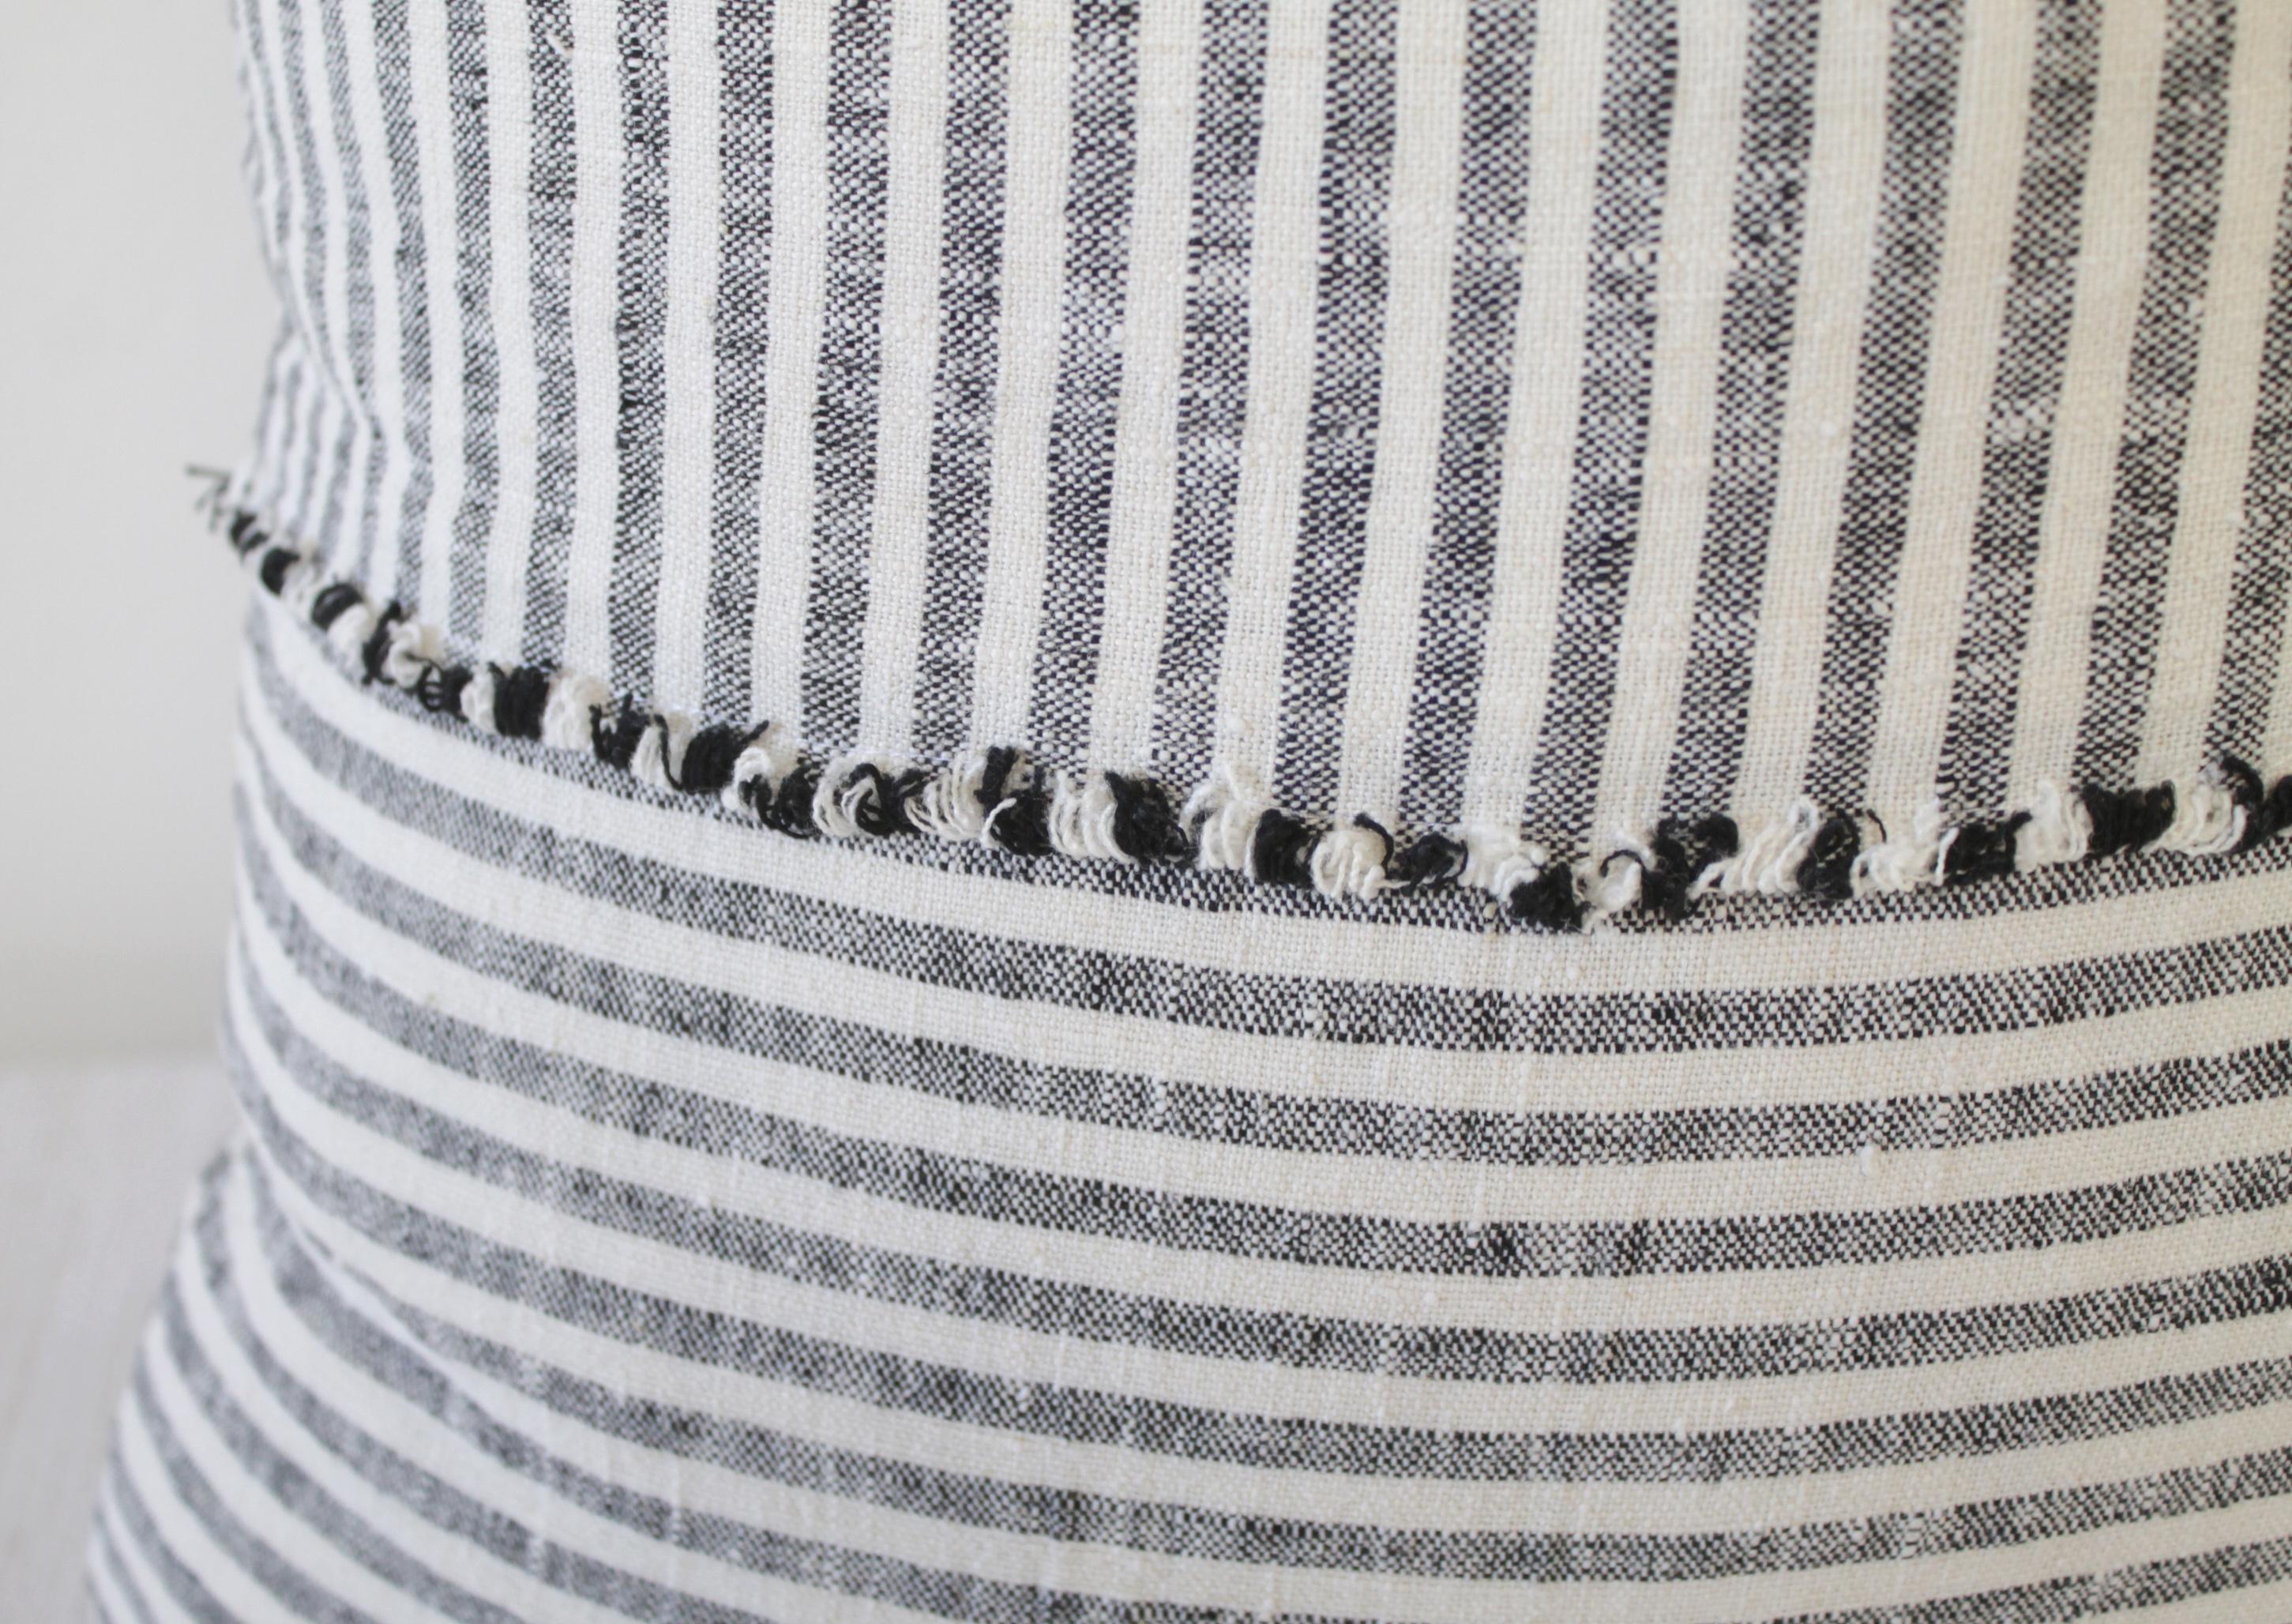 Organic linen accent pillows in black and white ticking stripe
Custom designed here in our studios, this 100% pure organic black and white stripe accent pillow was designed with a horizontal and vertical stripe face with frayed edge details. Order